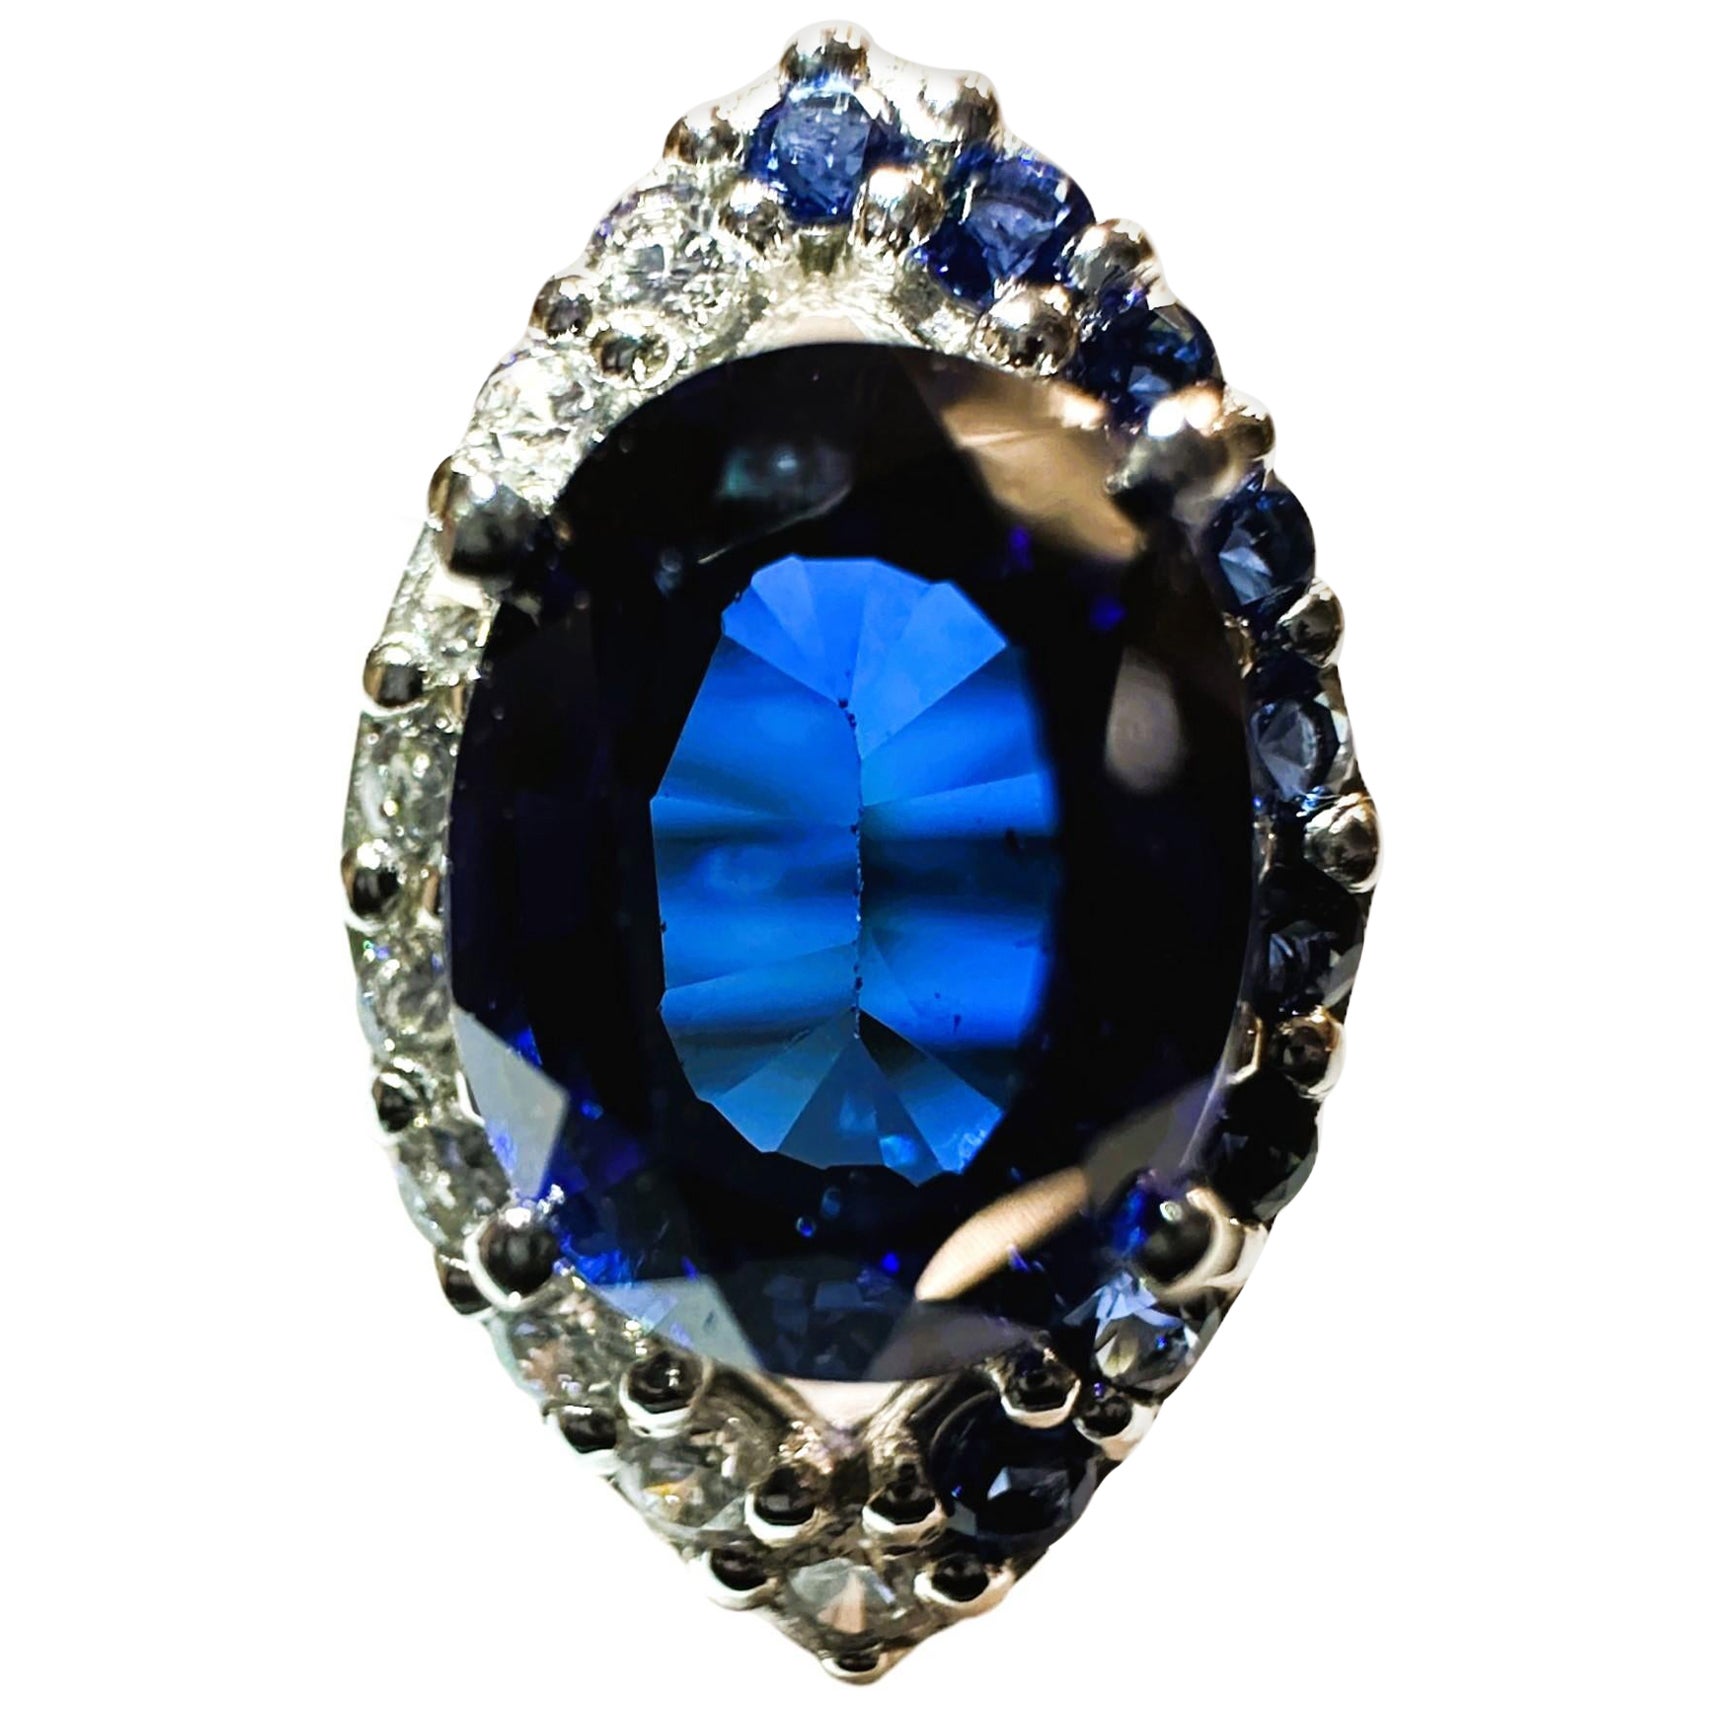 New Handmade African 3.60 Ct Deep Blue Sapphire Sterling Ring Size 6.75 For Sale